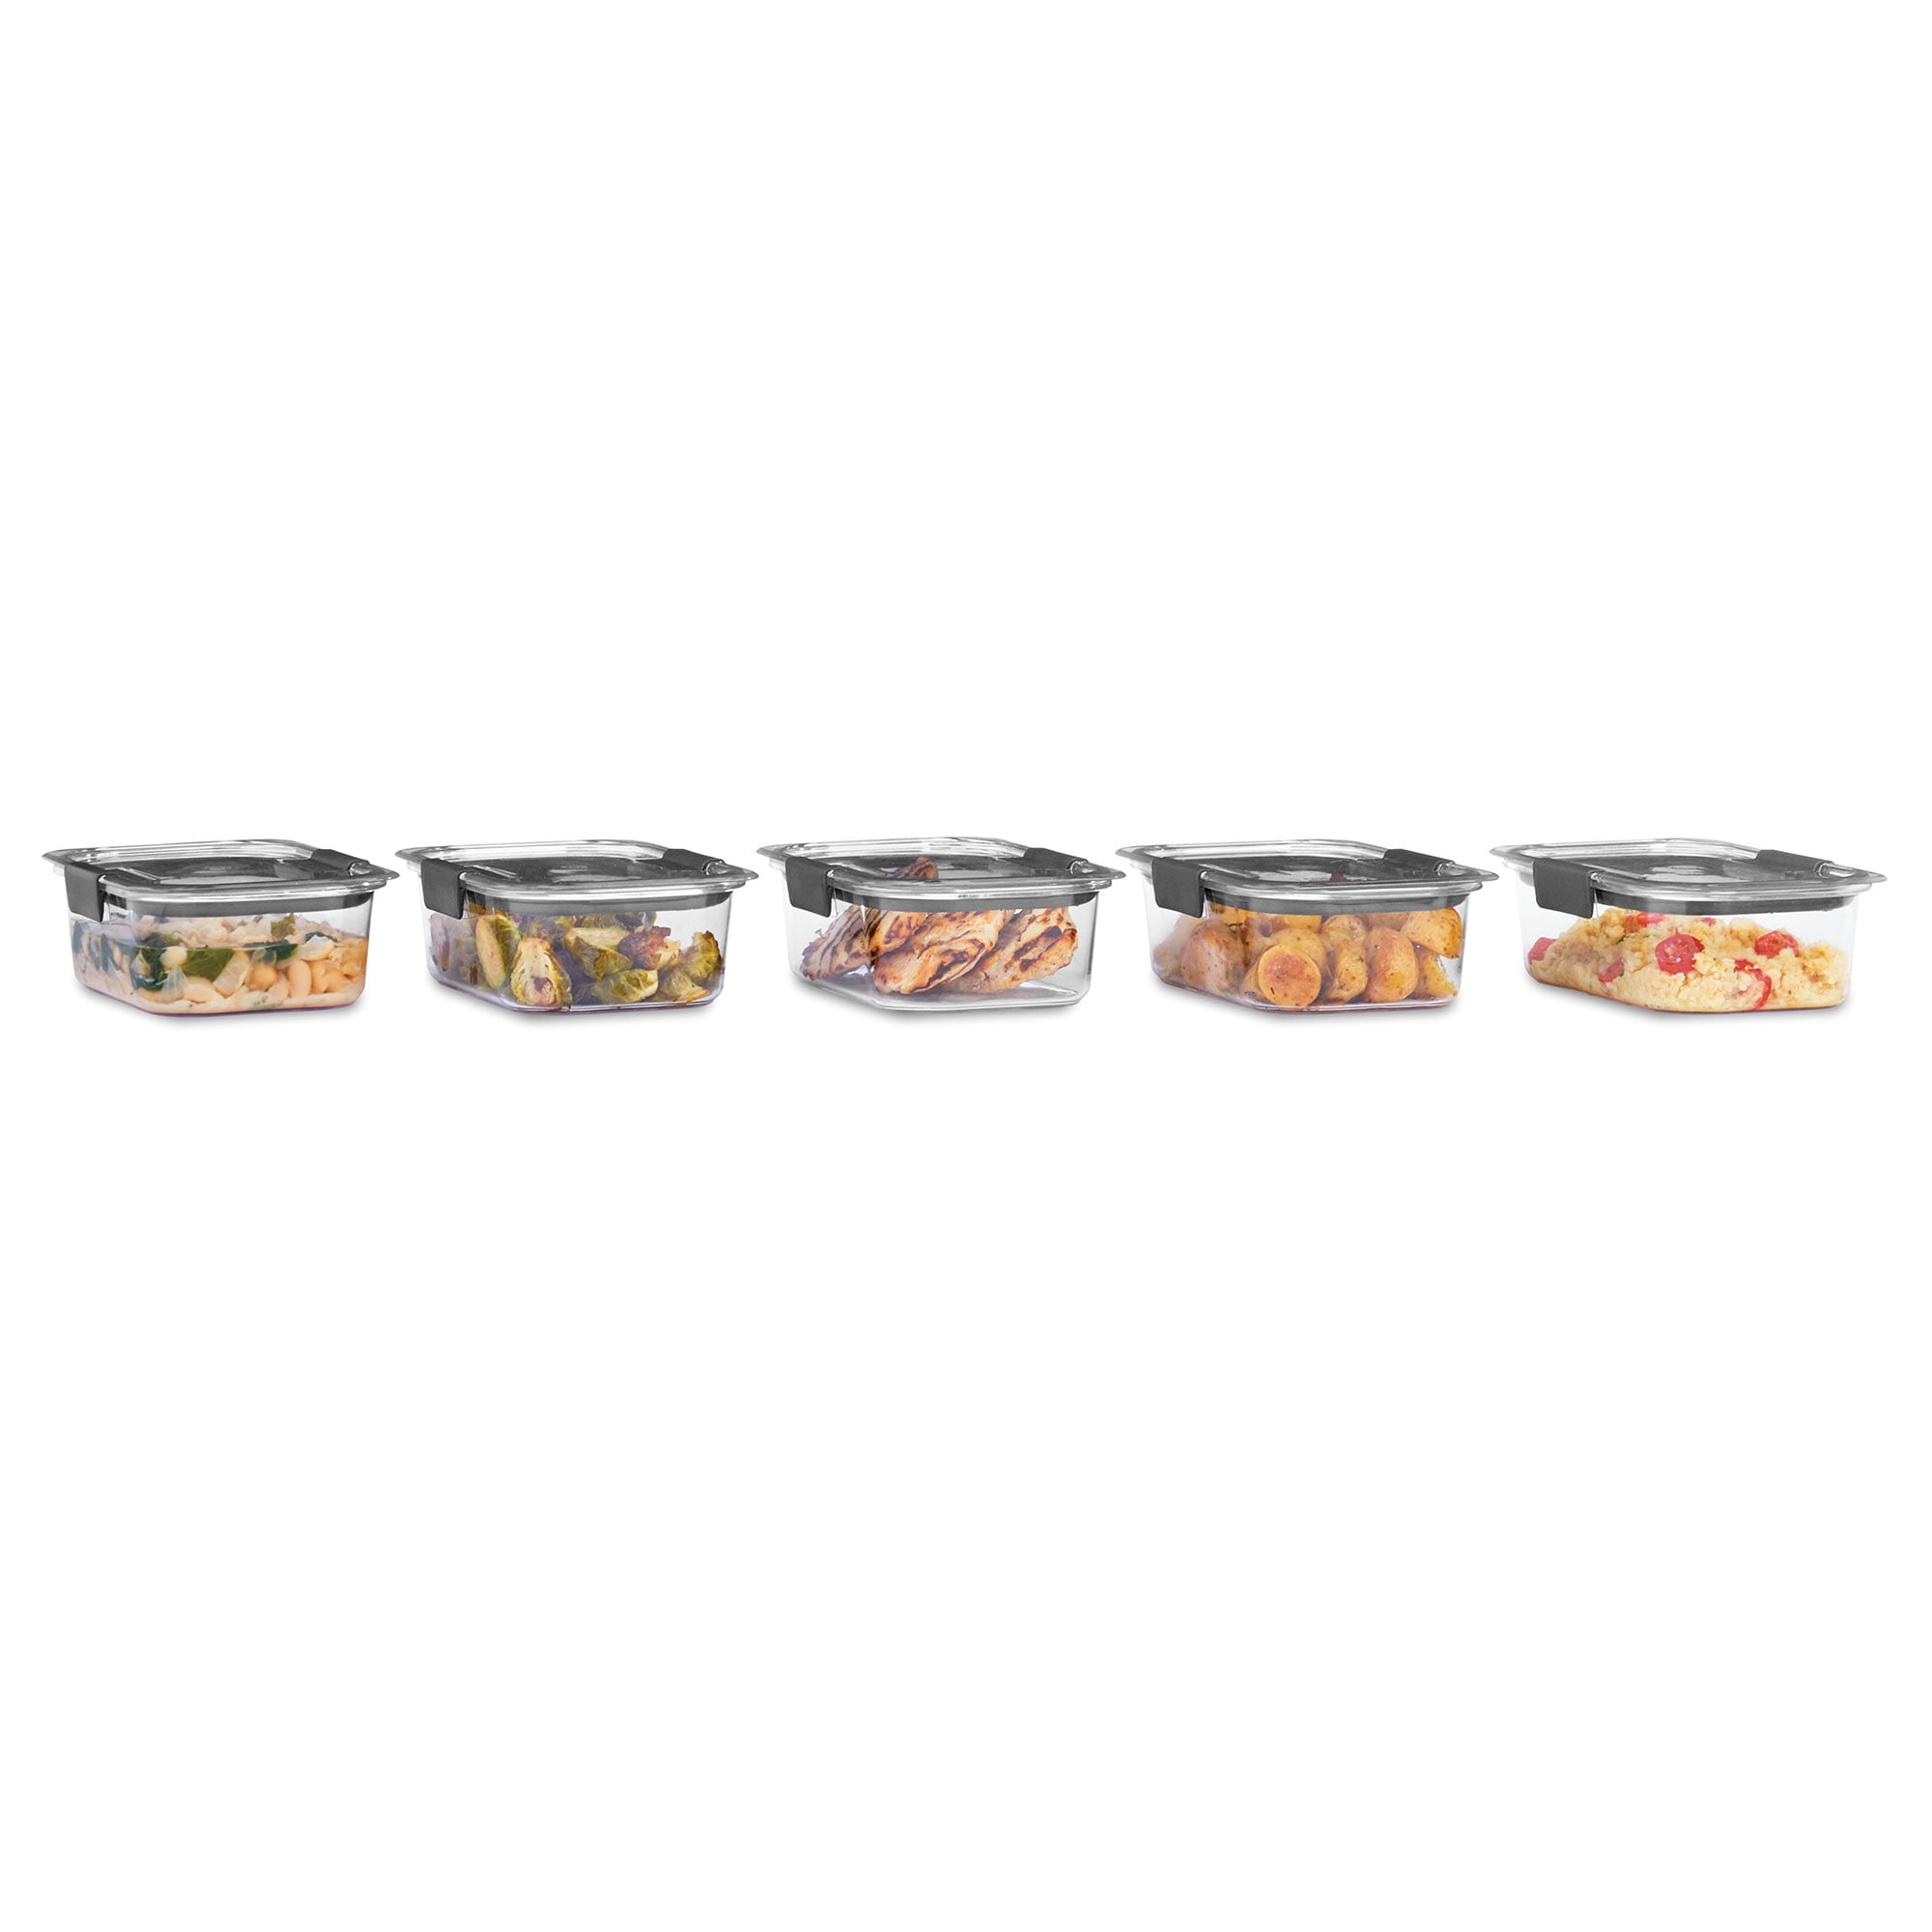 Rubbermaid Brilliance Food Storage Container, Medium, 3.2 Cup, Clear,  2-Pack (2025333)